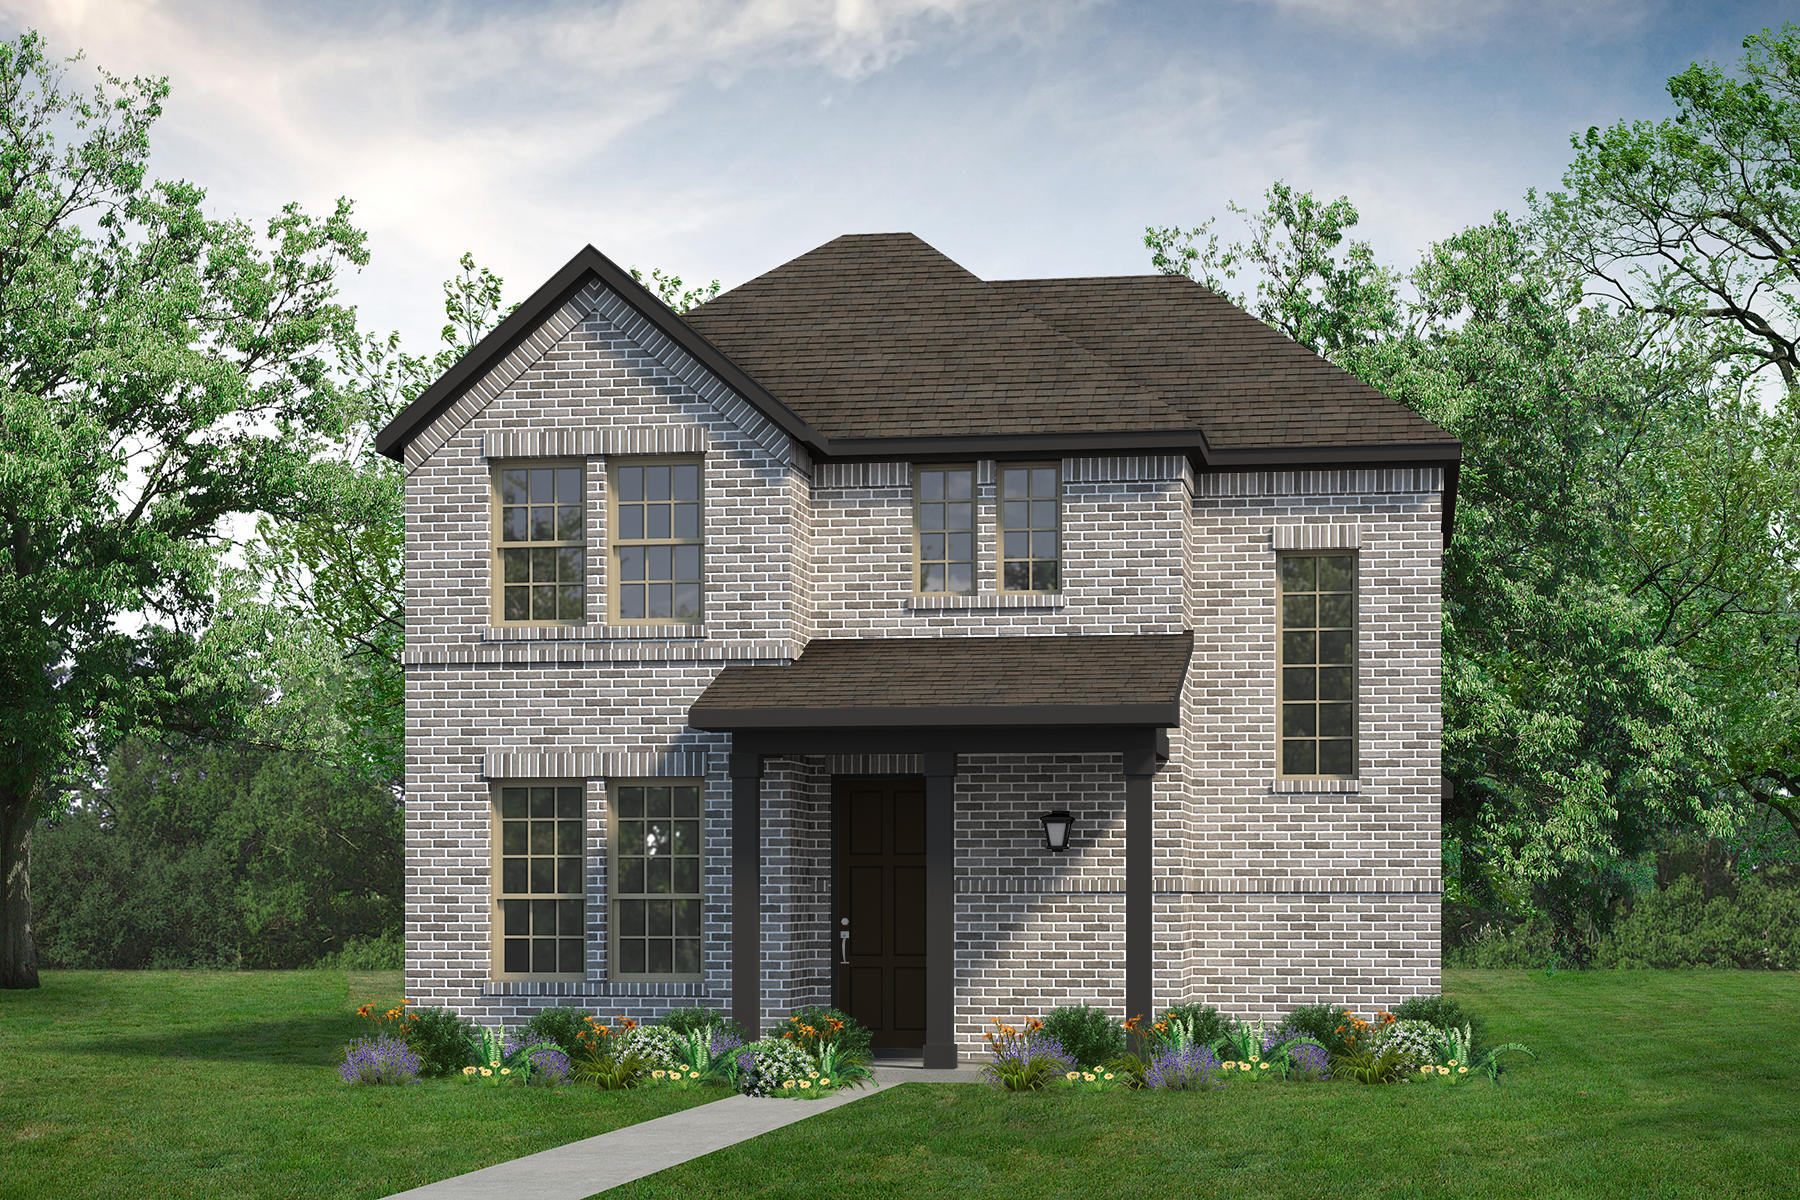 A rendering of a two-story home with the Belton floor plan.